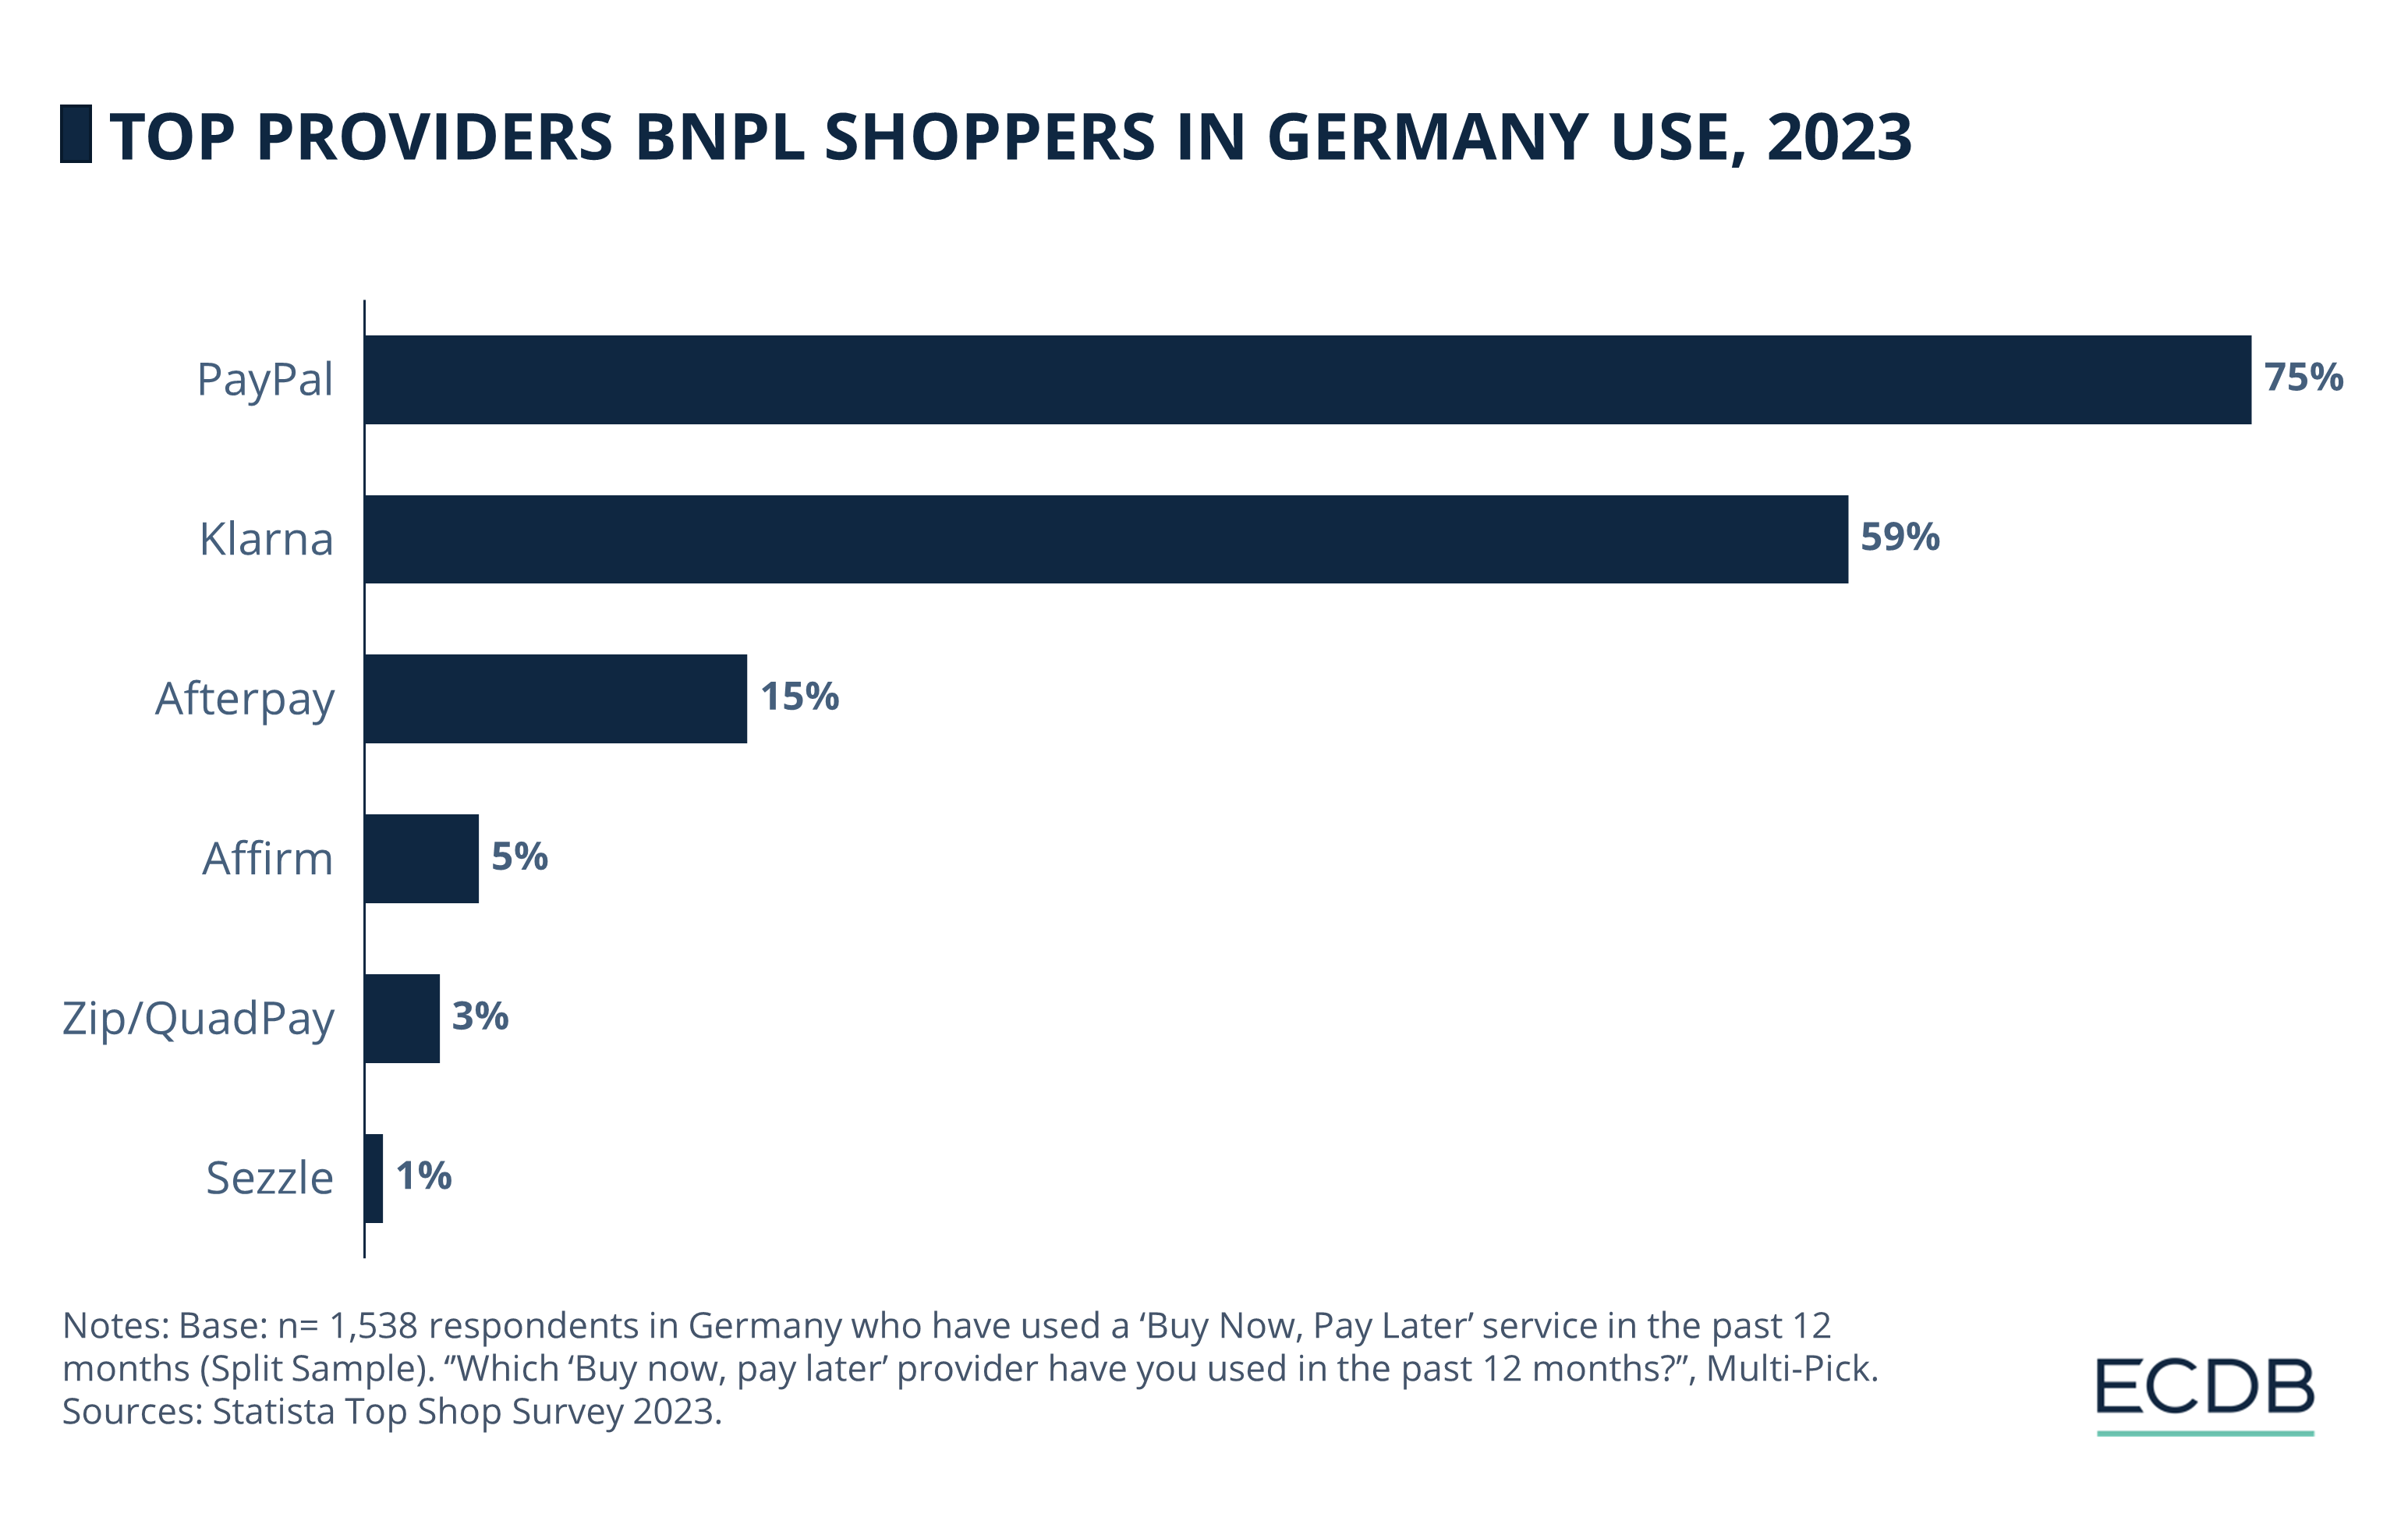 Top Providers BNPL Shoppers in Germany Use, 2023